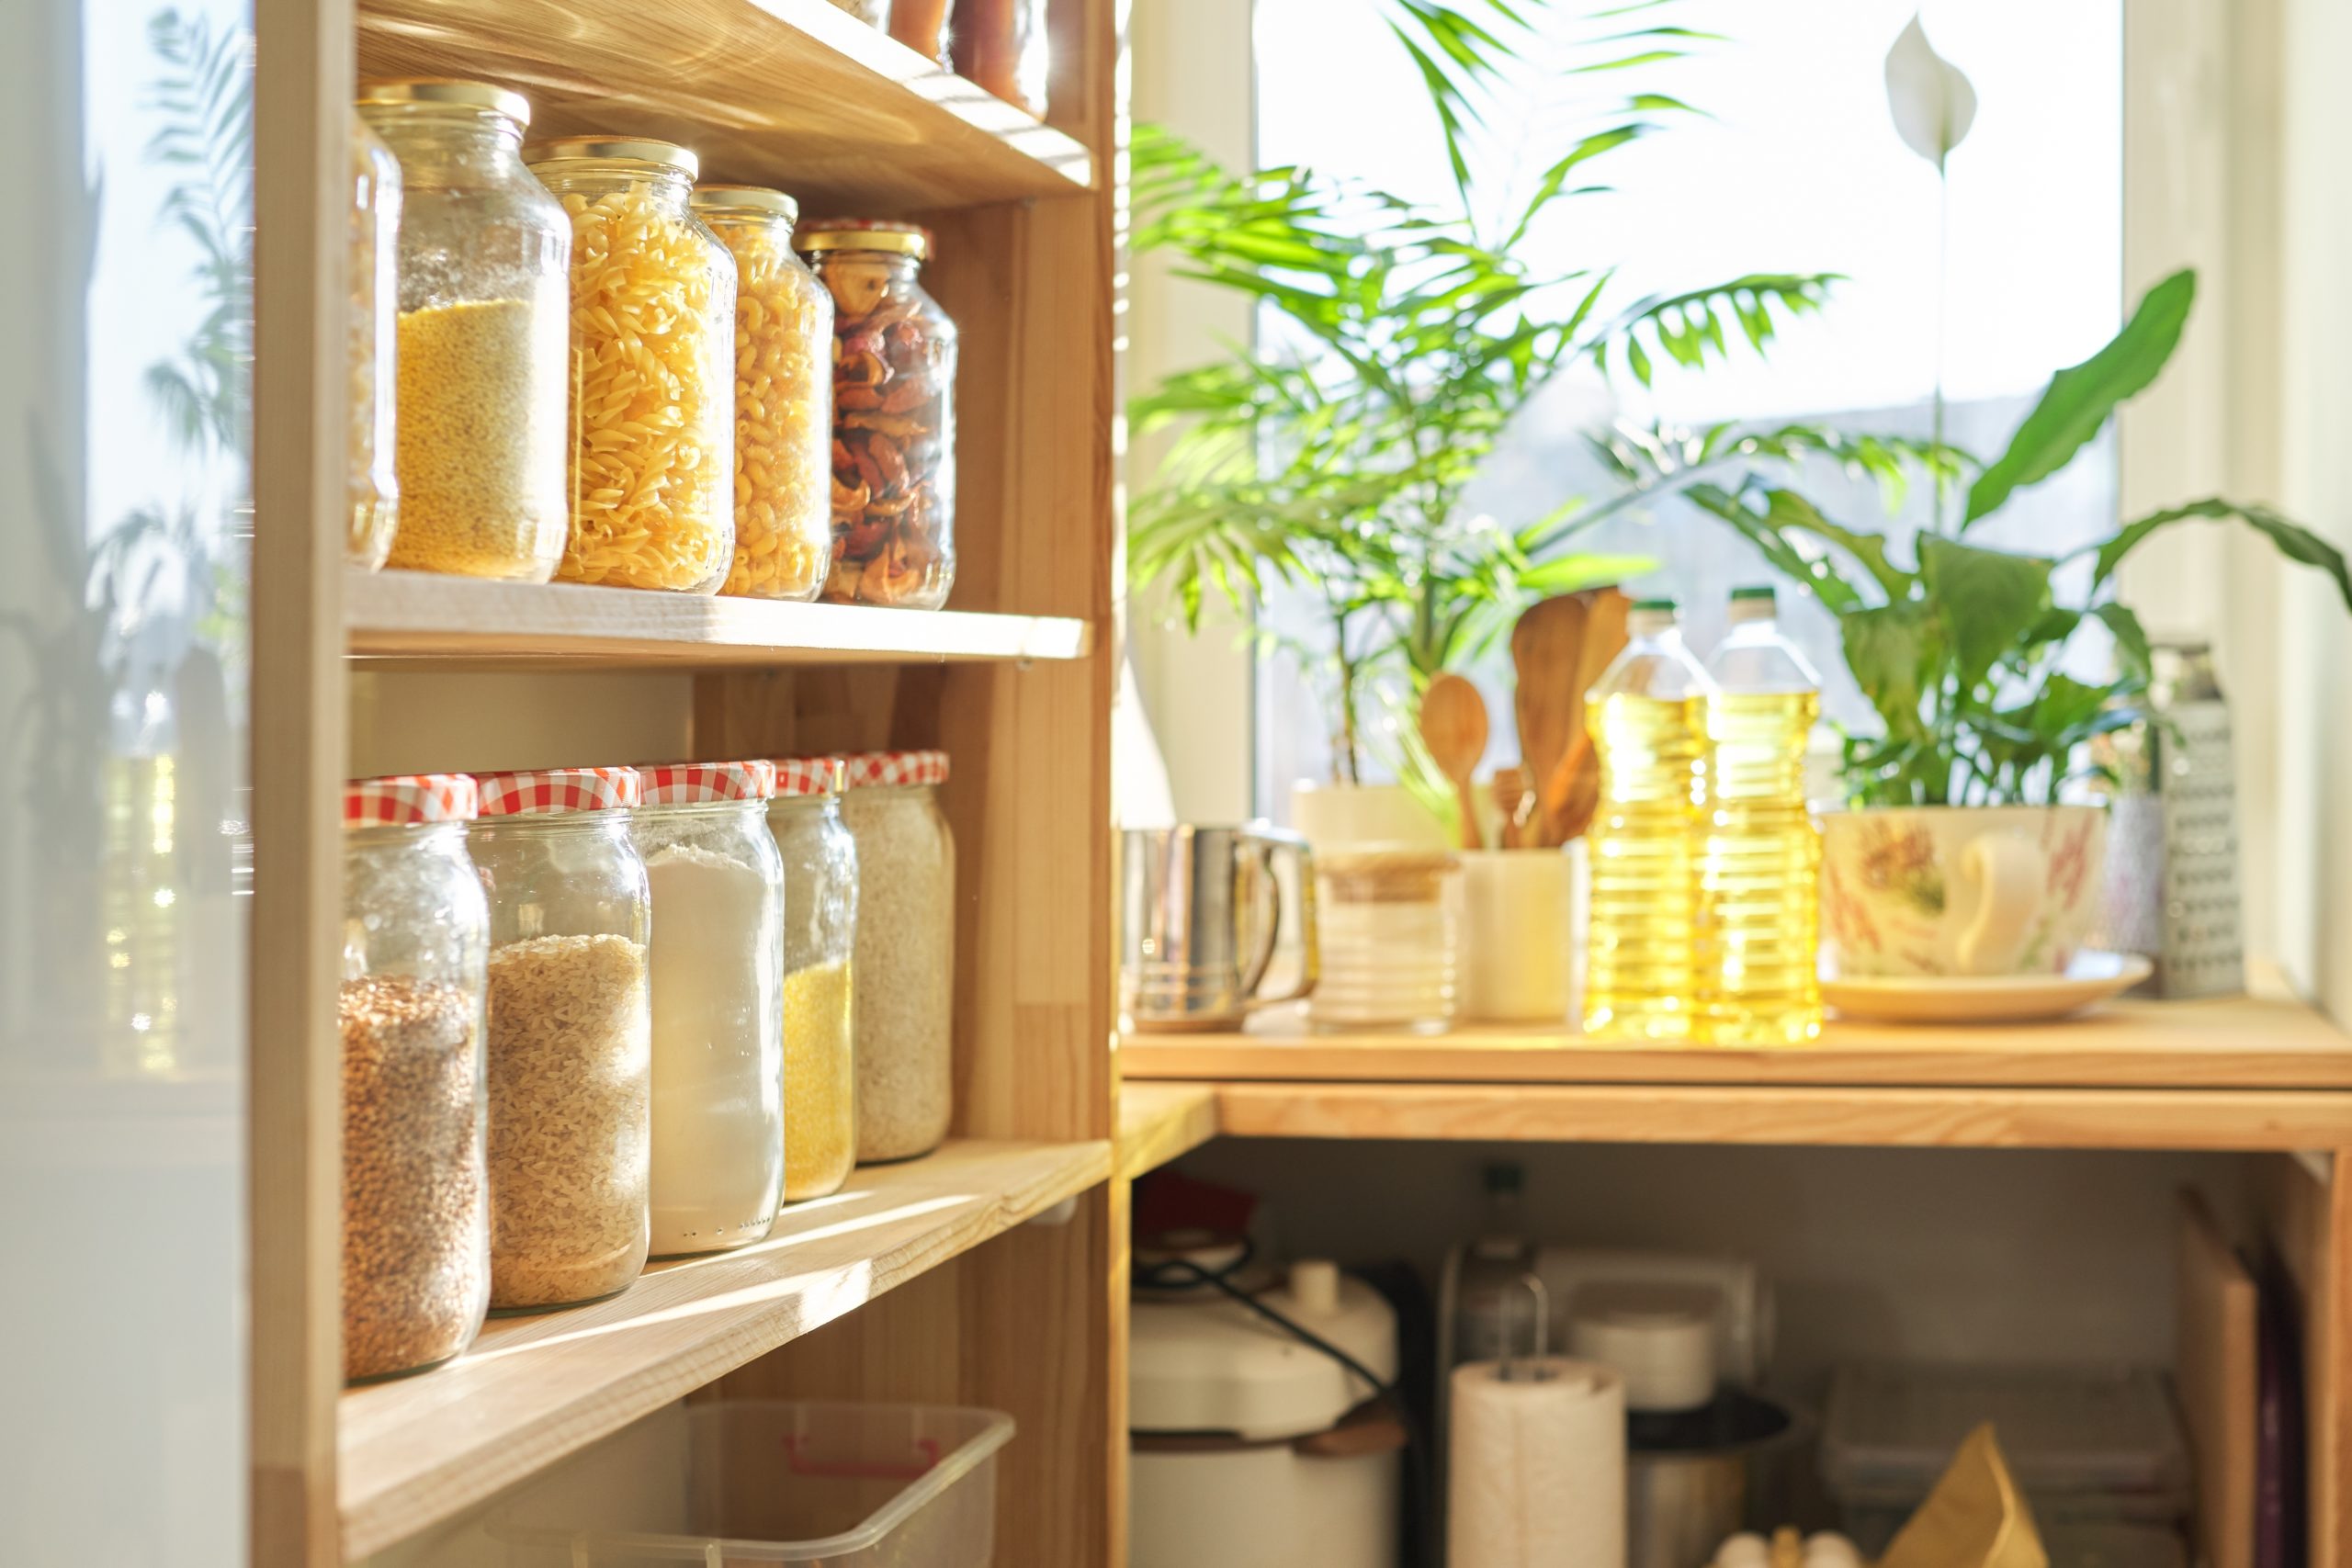 how to organize your pantry